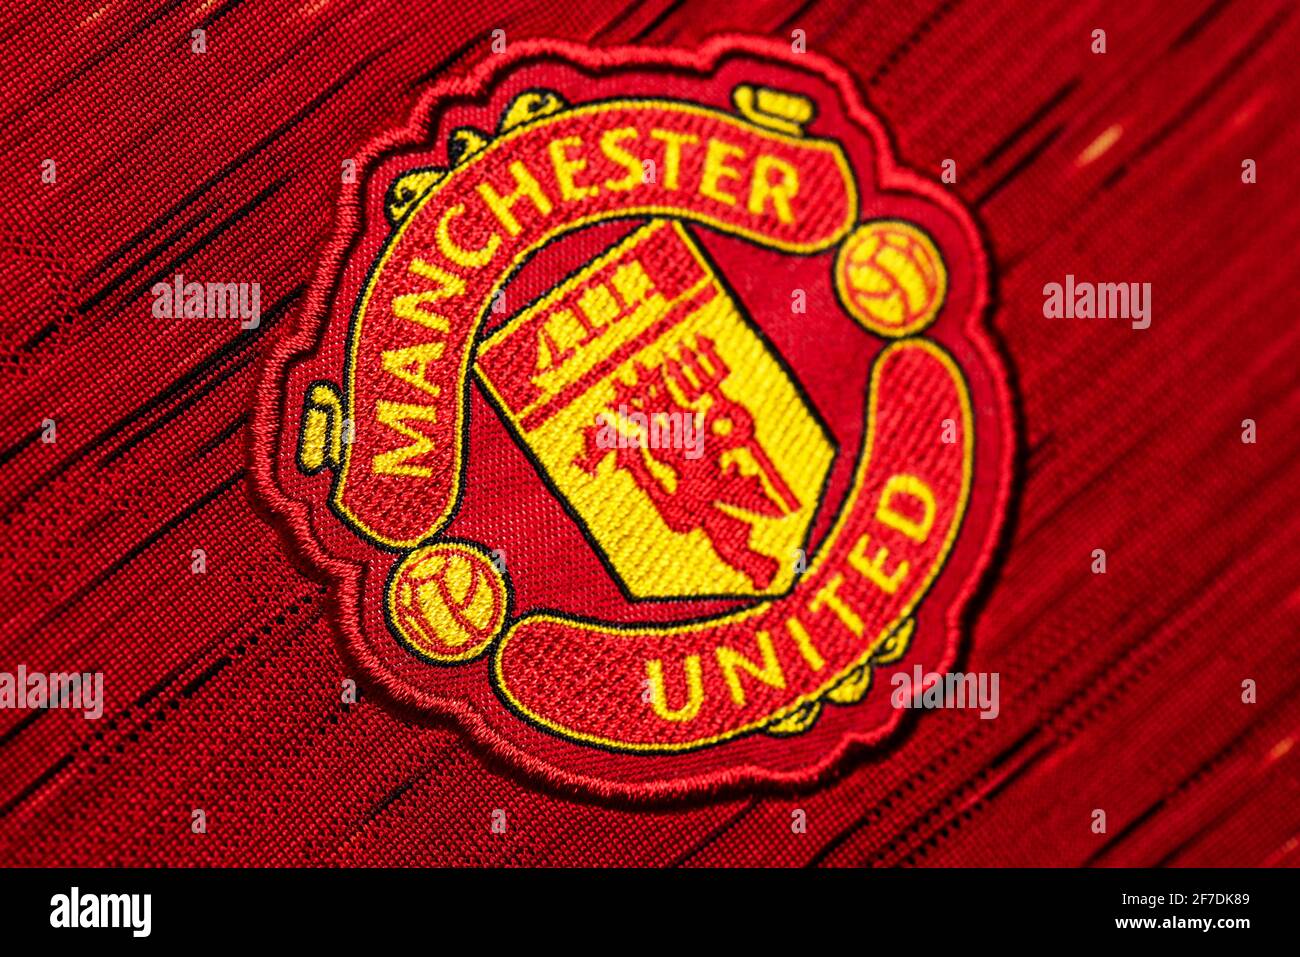 Man Utd Logo High Resolution Stock Photography And Images Alamy